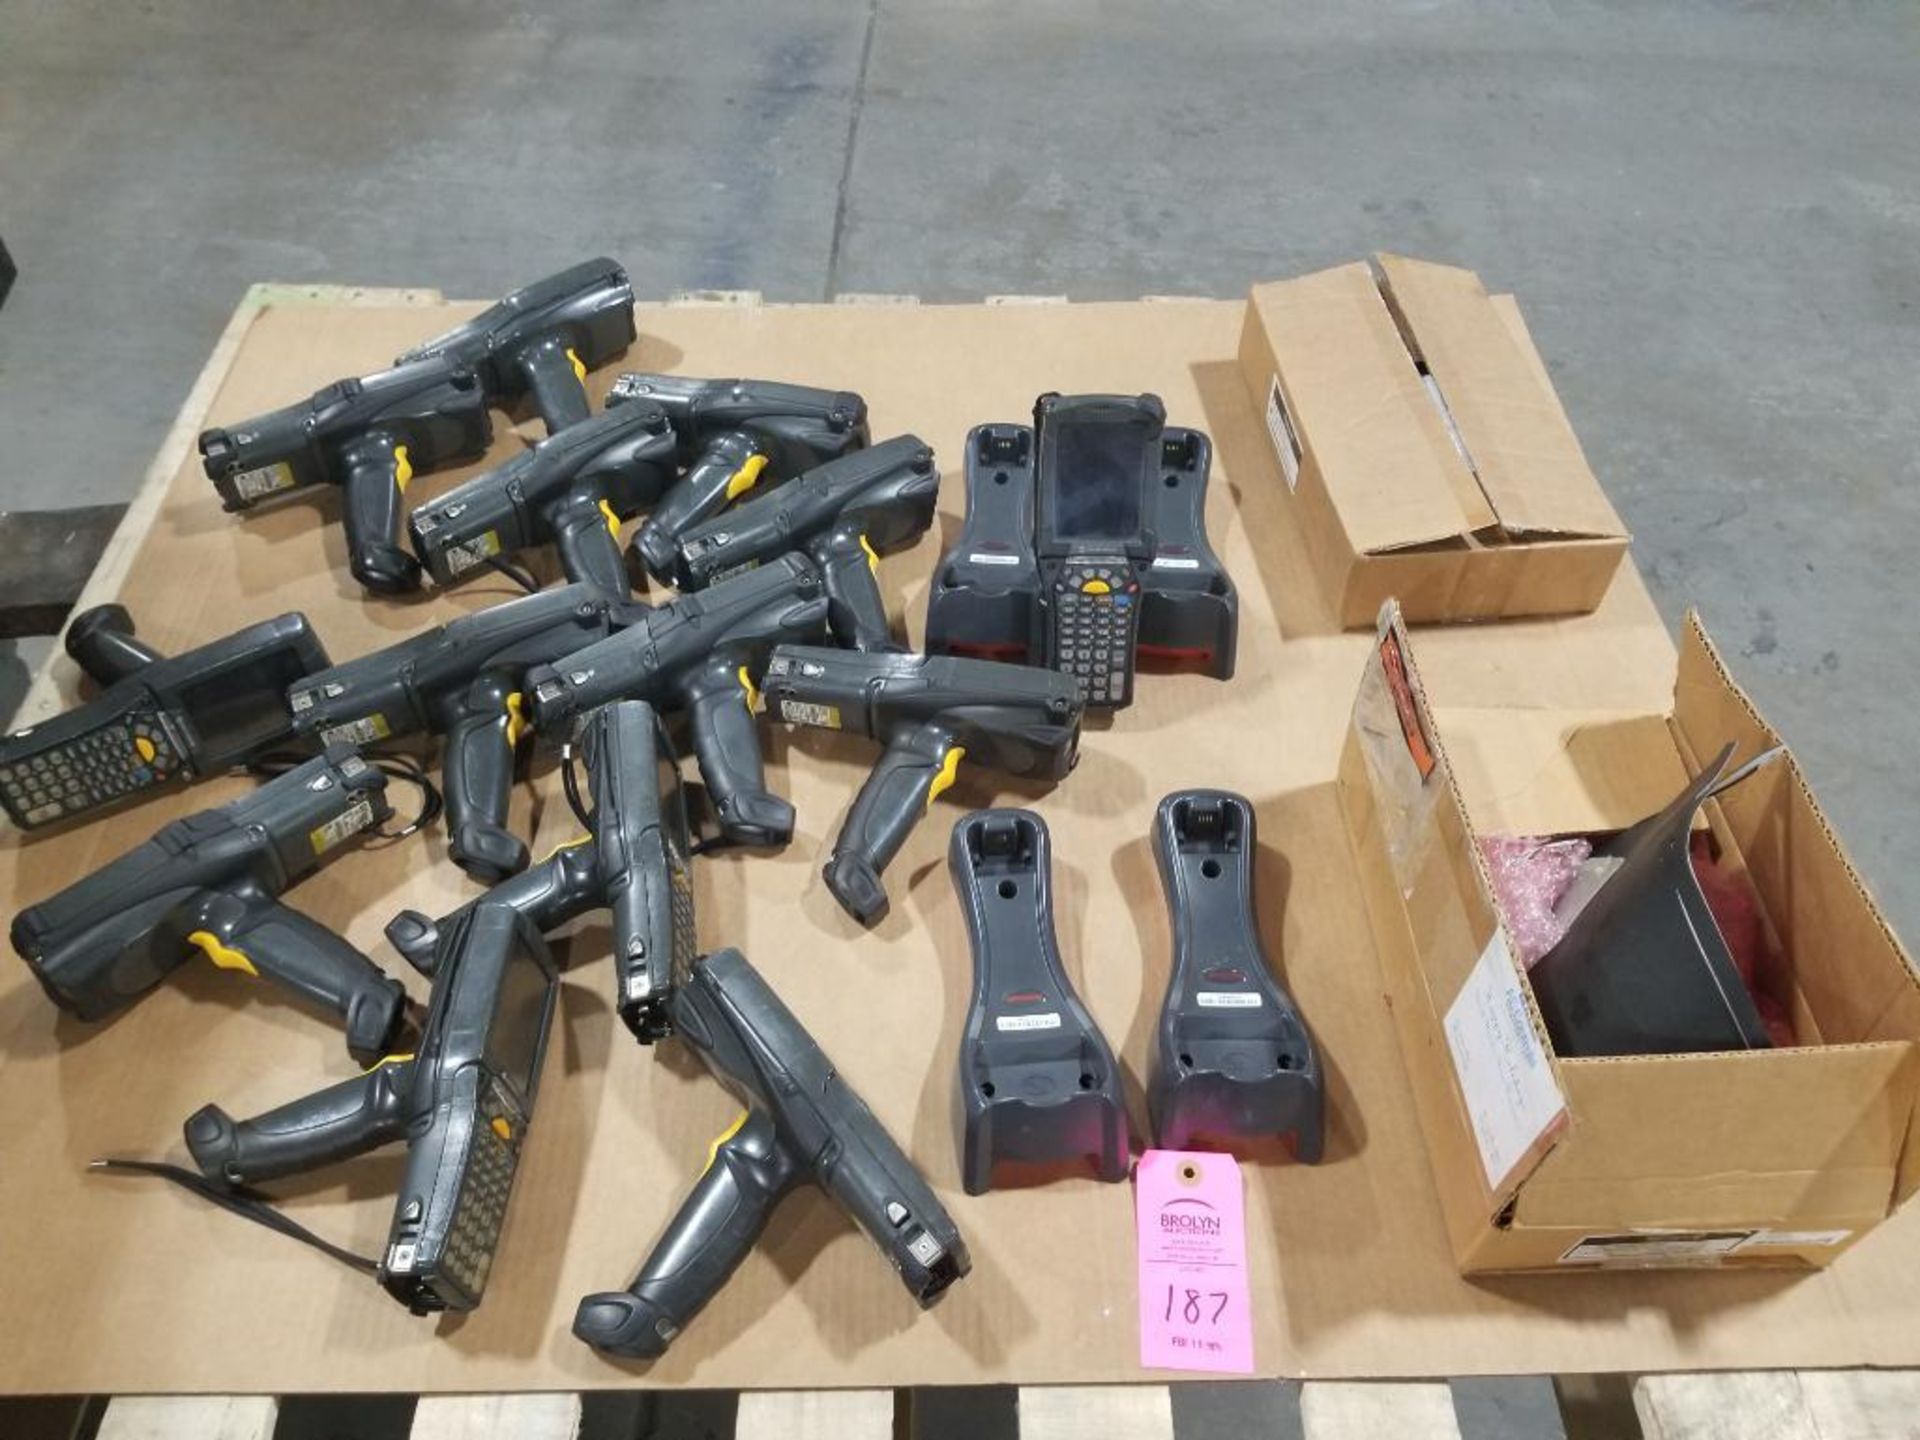 Large assortment of hand held bar code scanners.